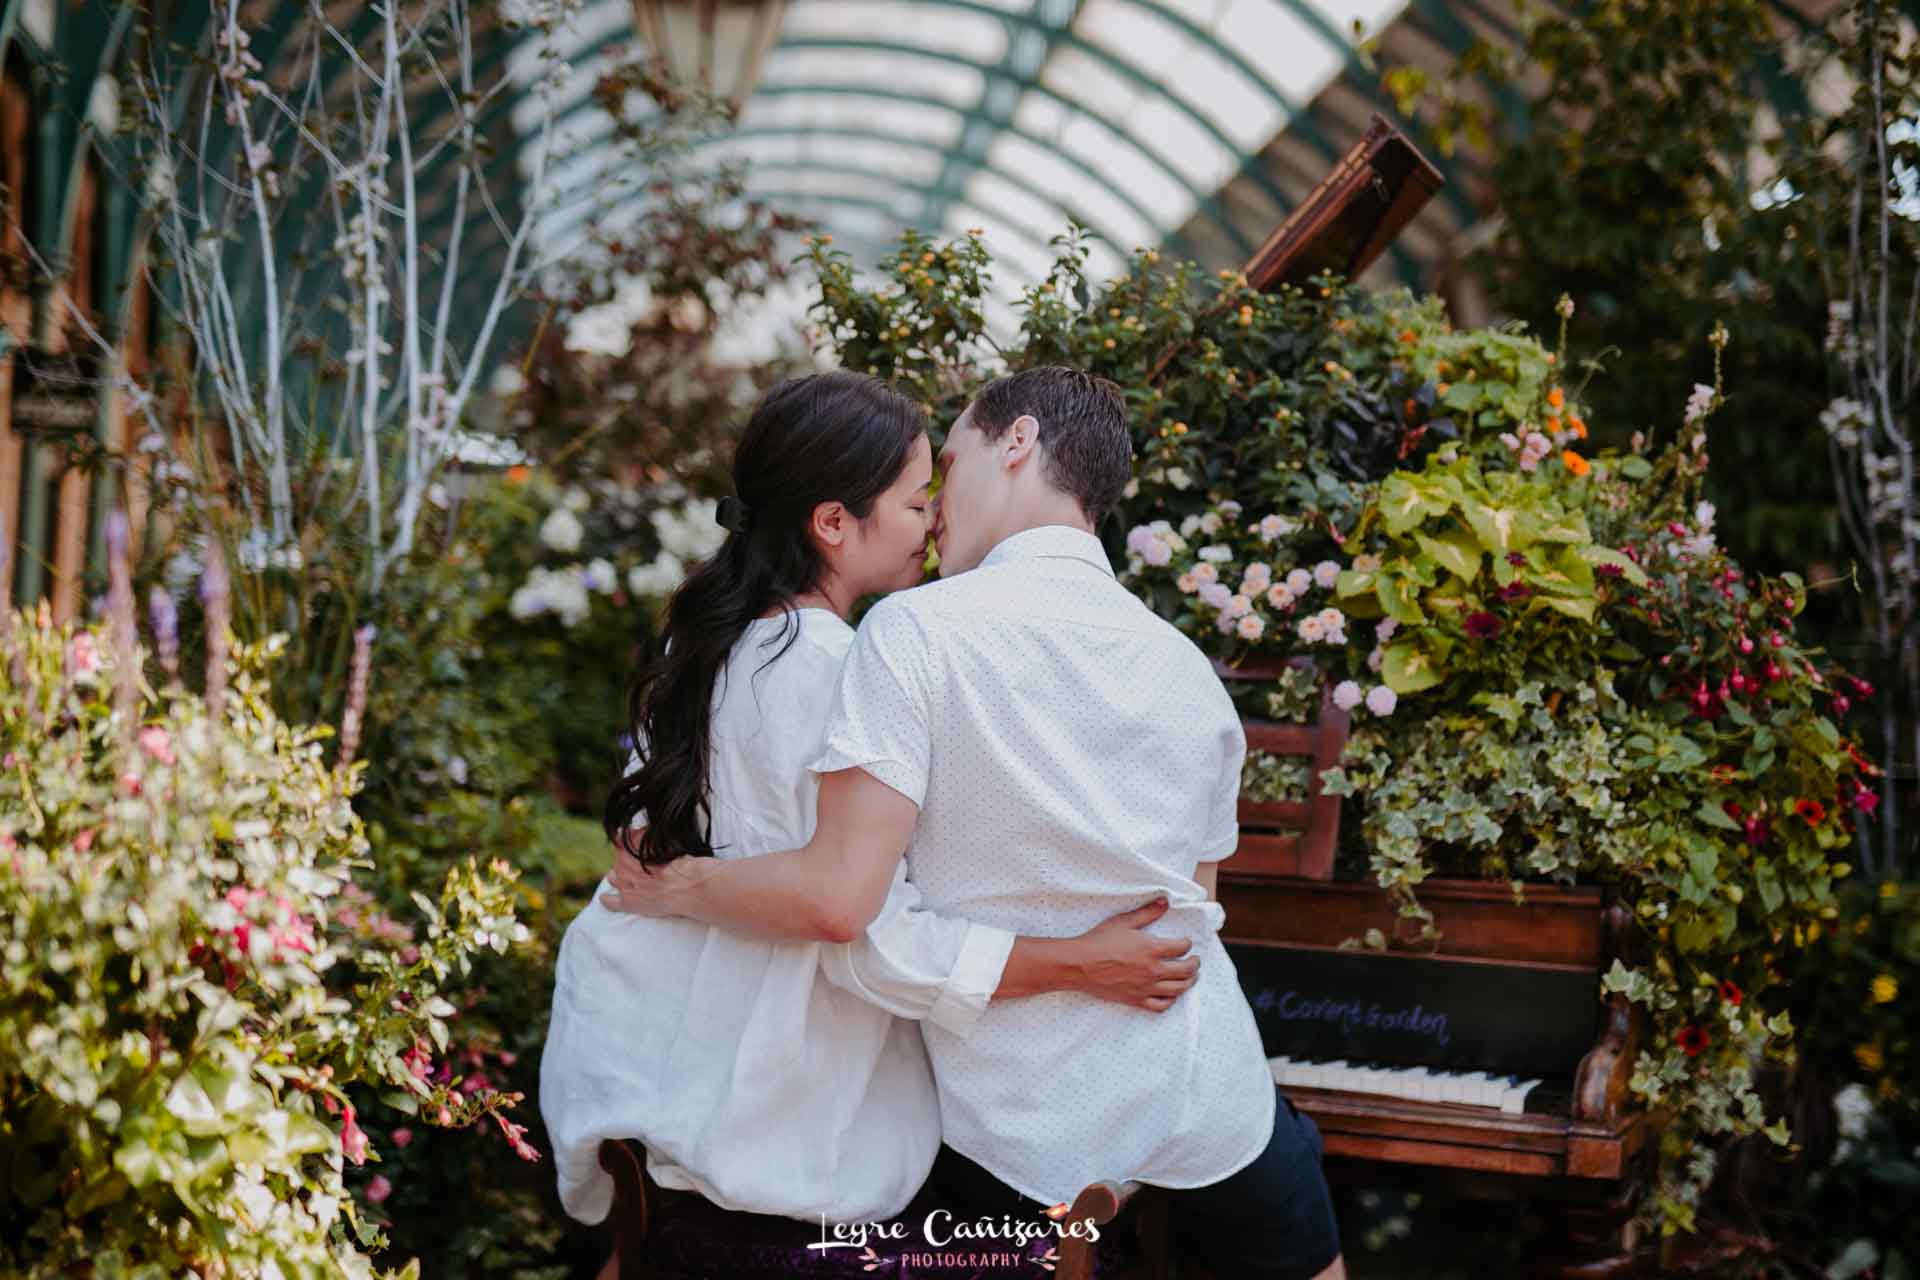 destionation wedding and elopement photographer based in NYC and Madrid